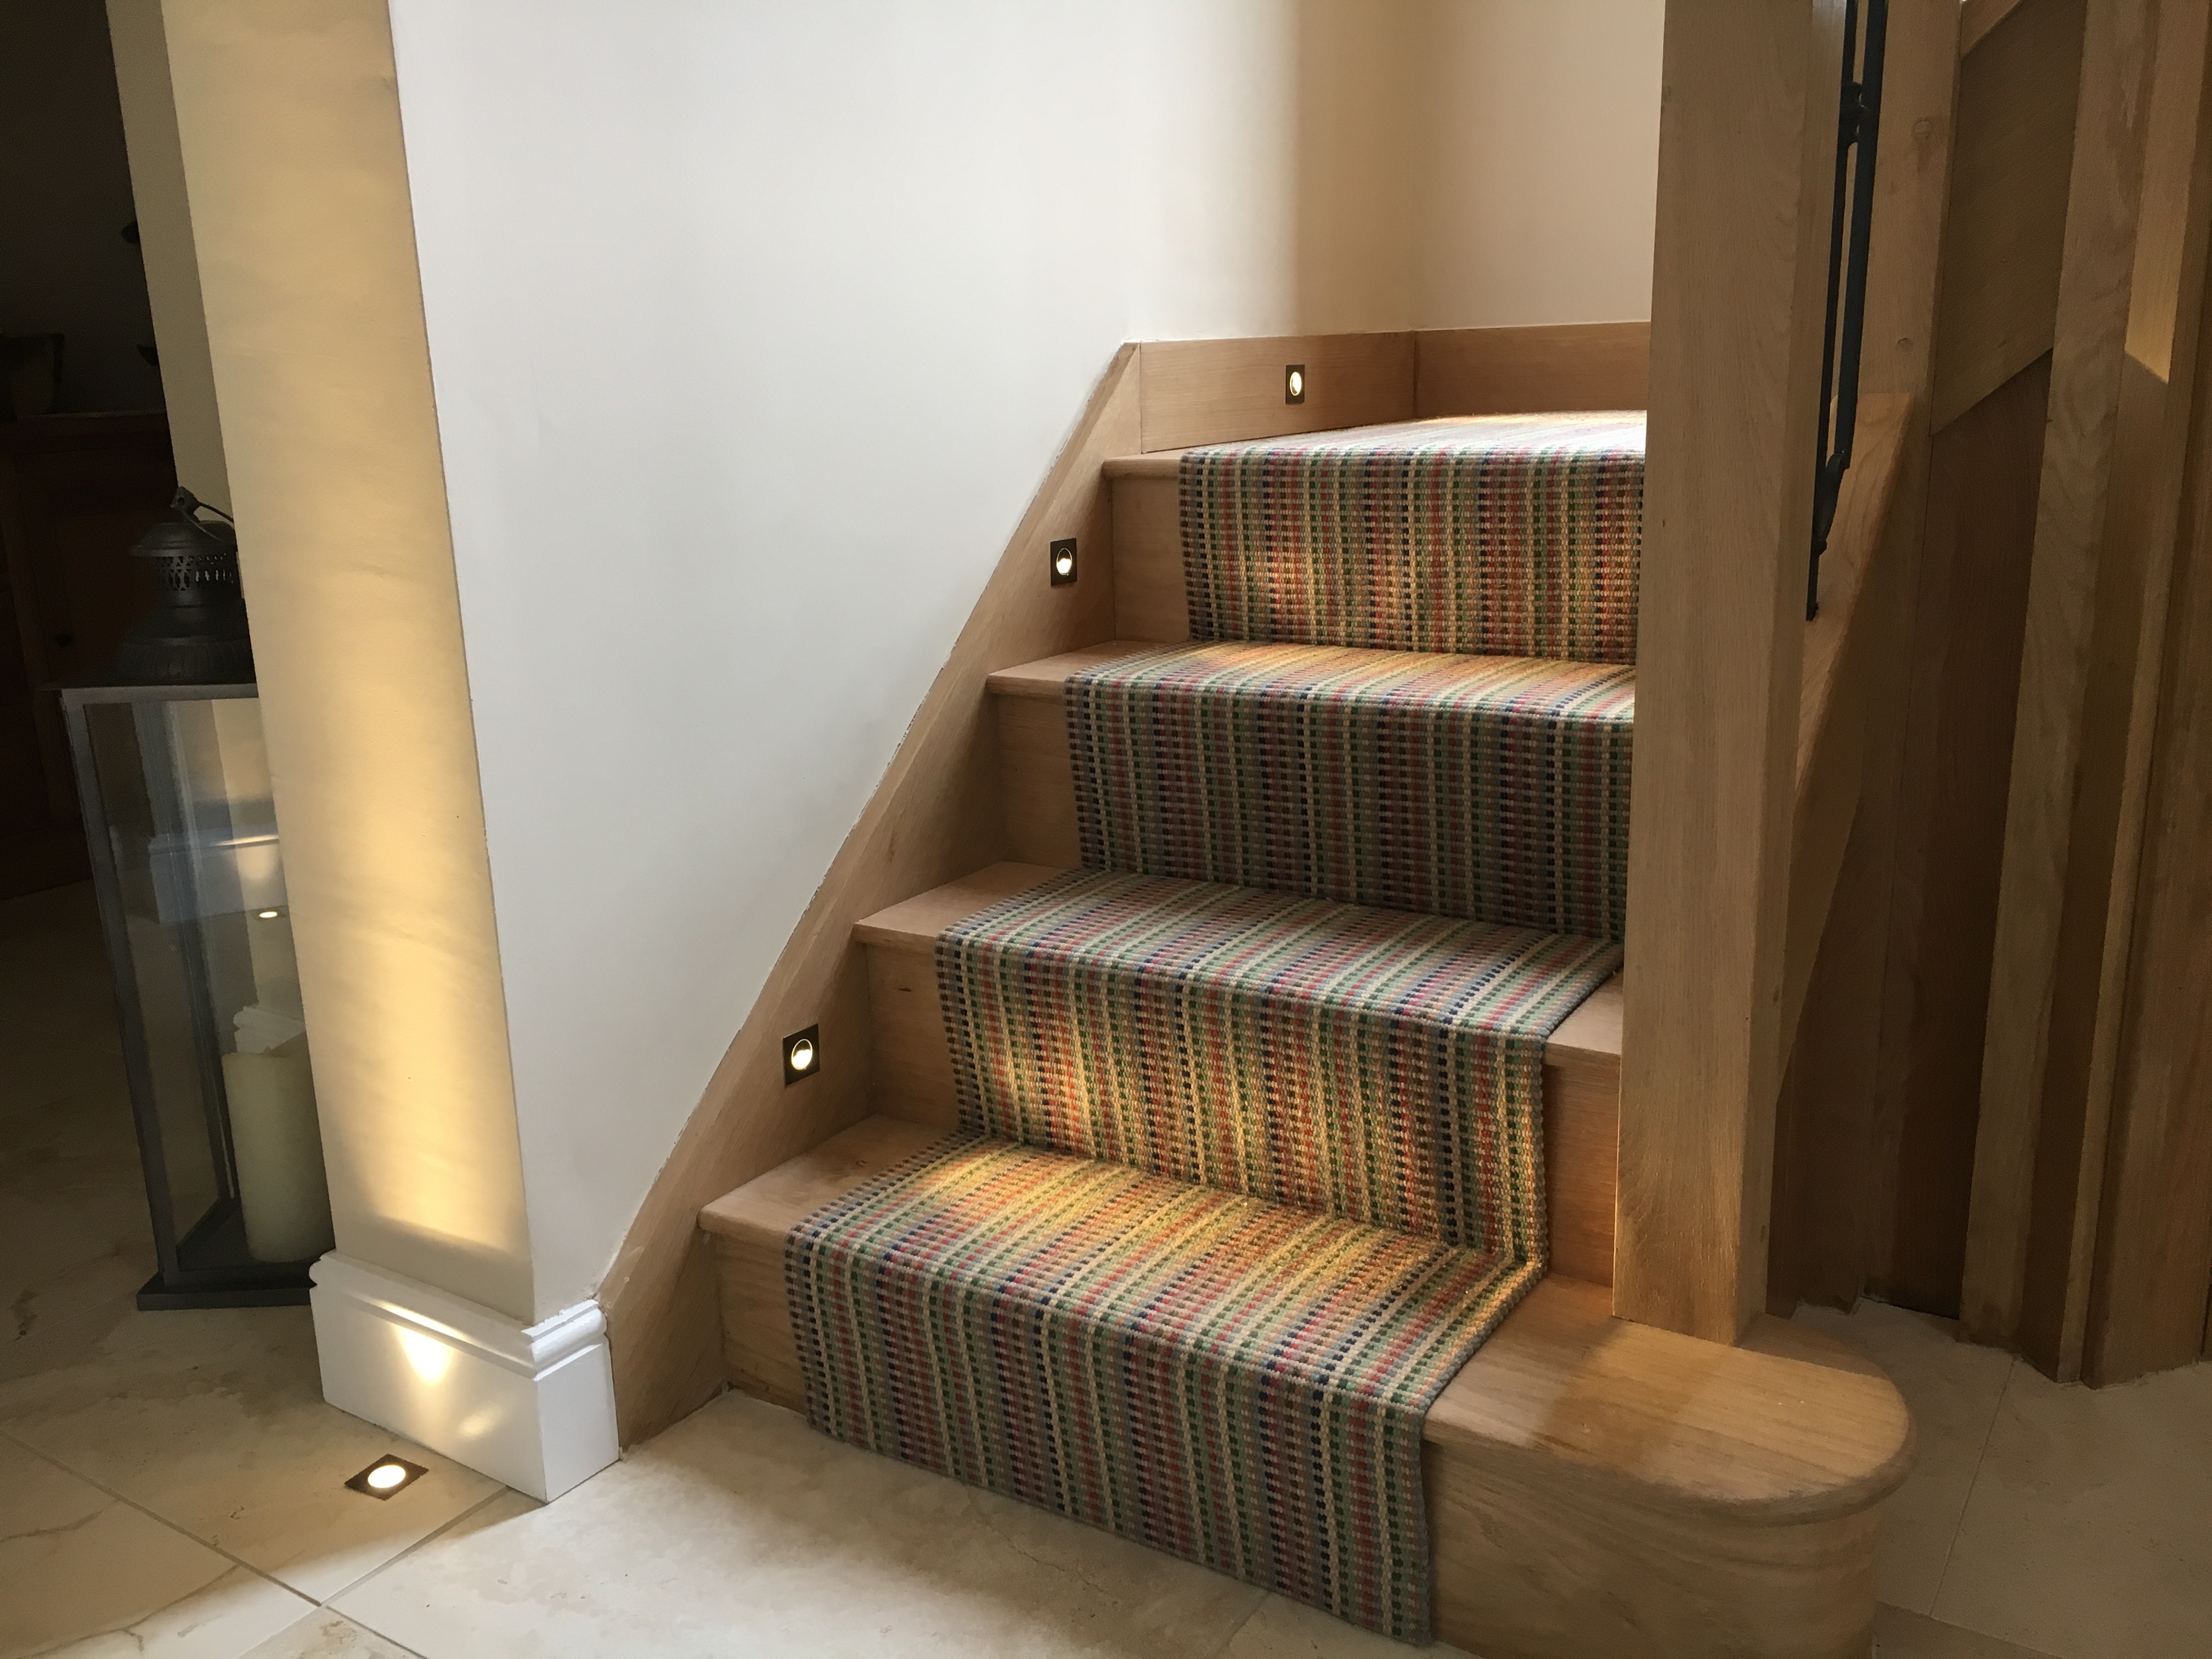 Stairwell lighting installation in Ely